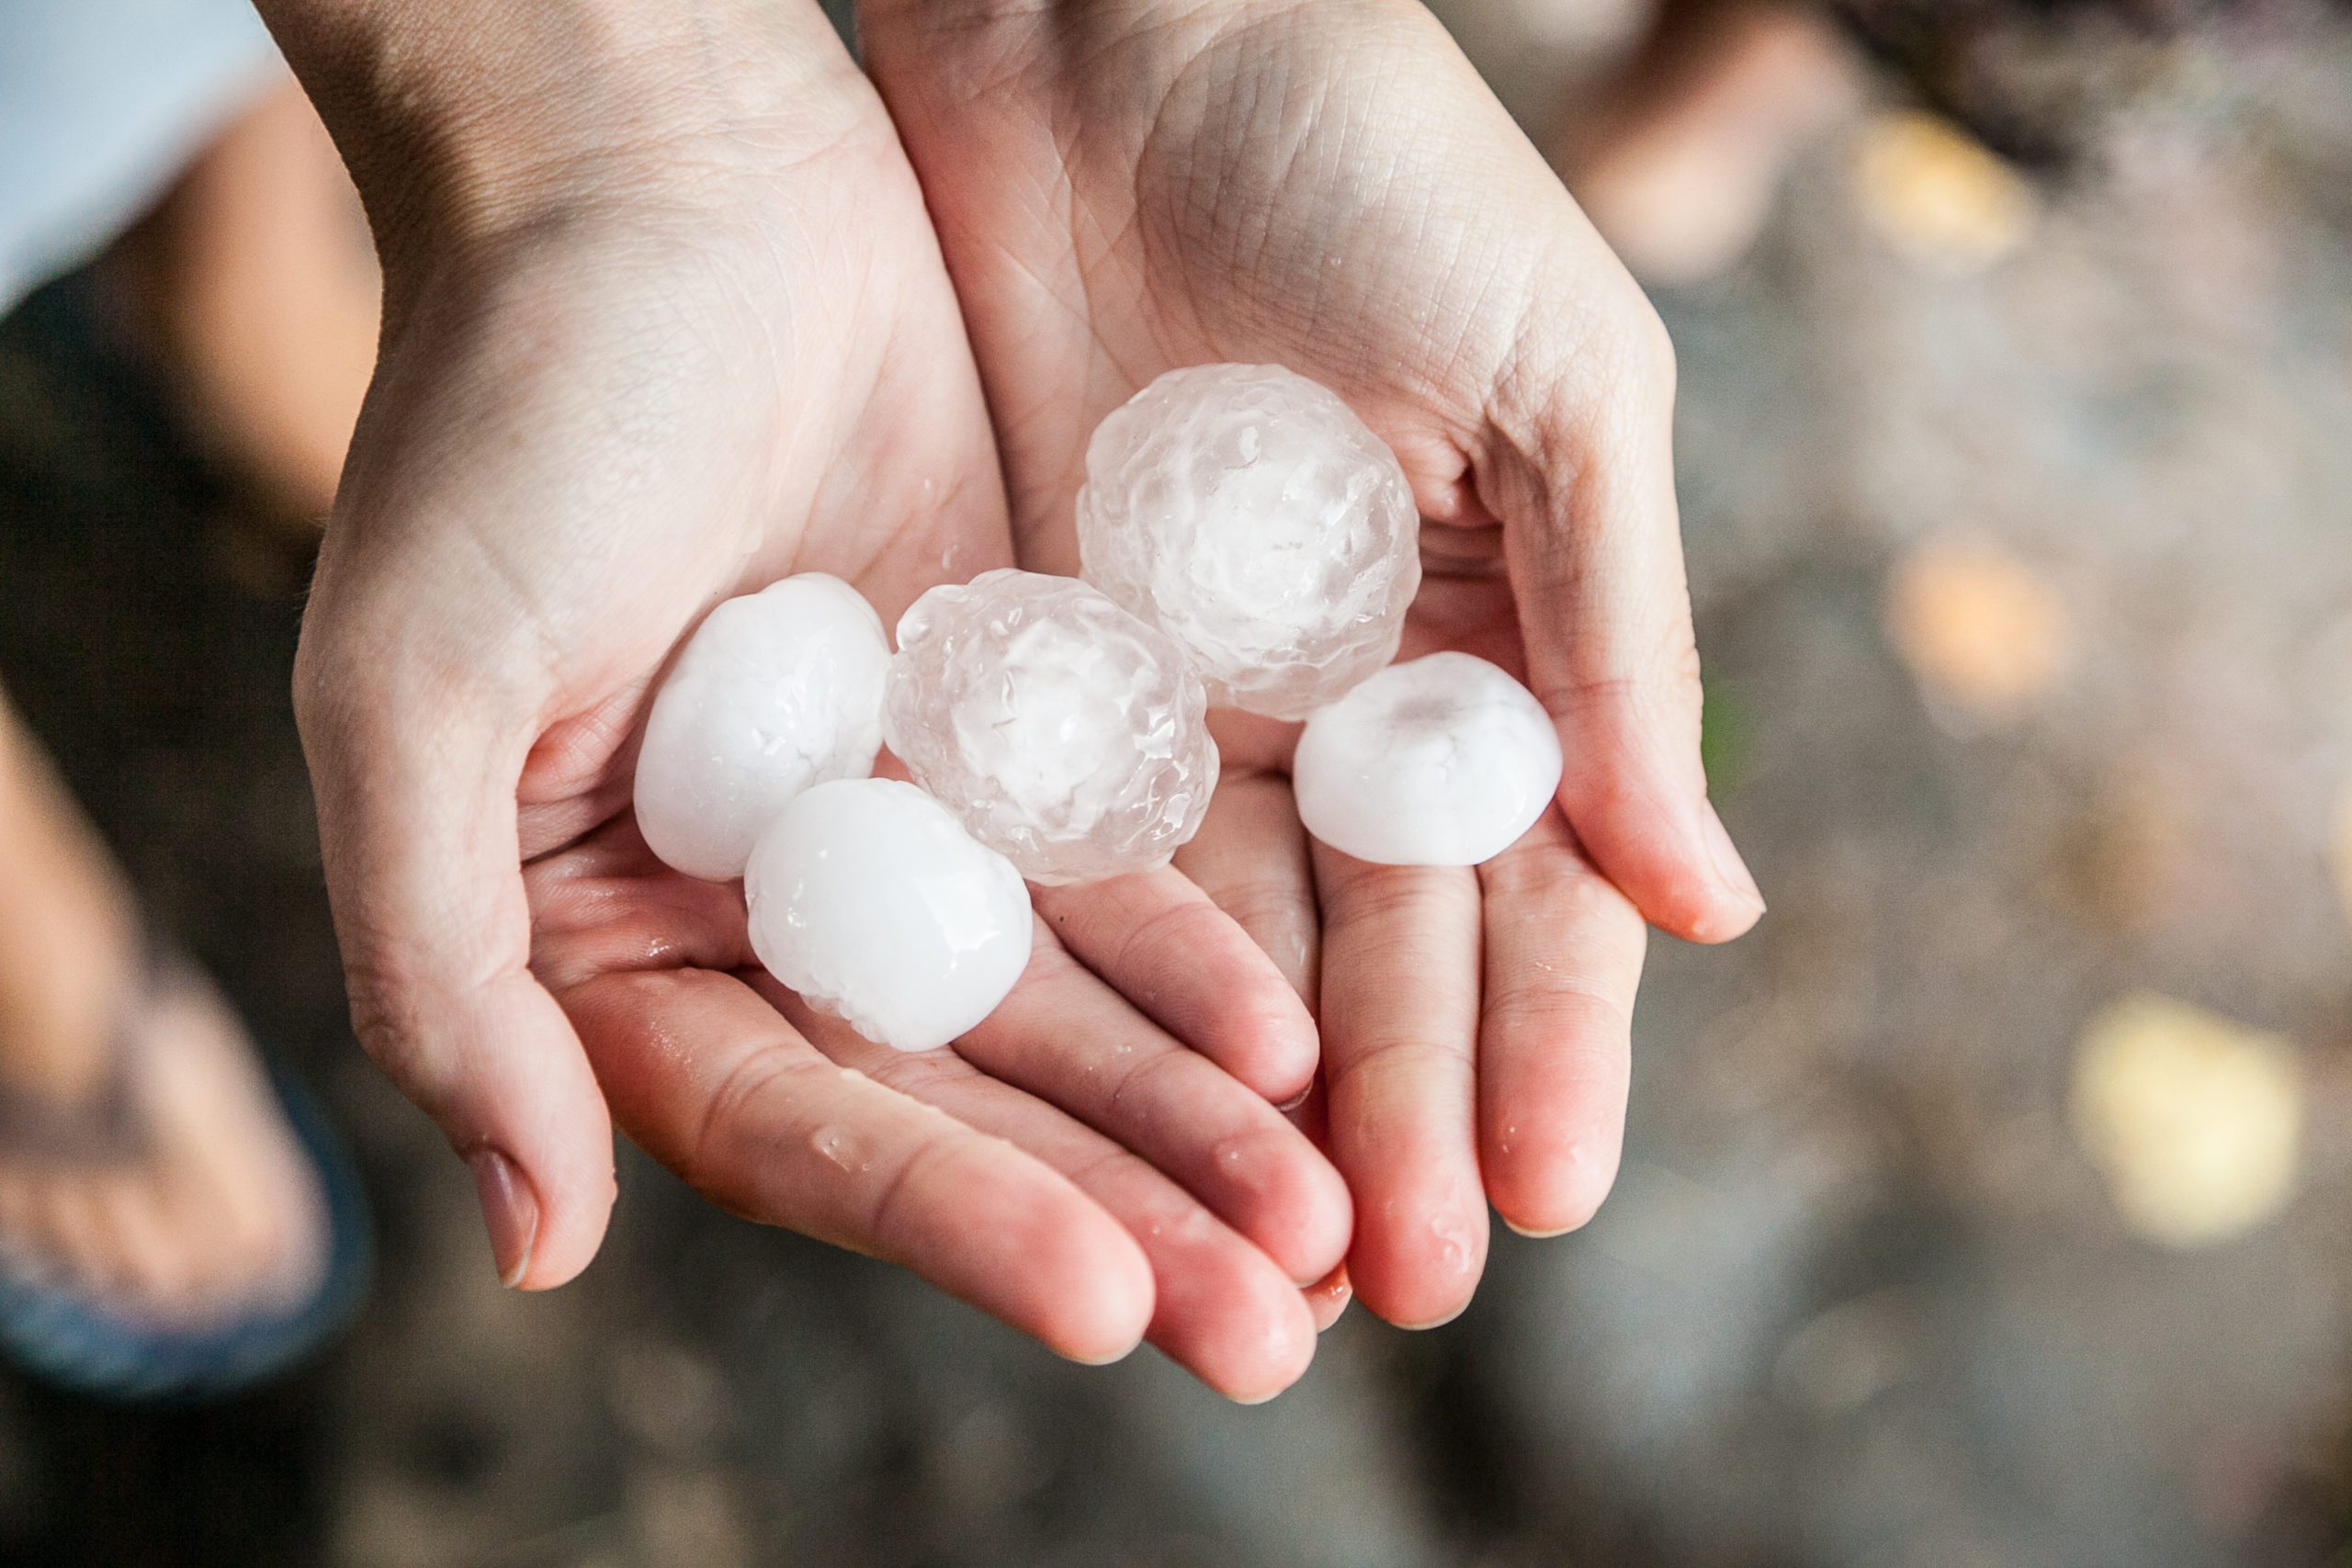 A person holding 5 large pieces of hail in their hand after a storm causing severe hail damage